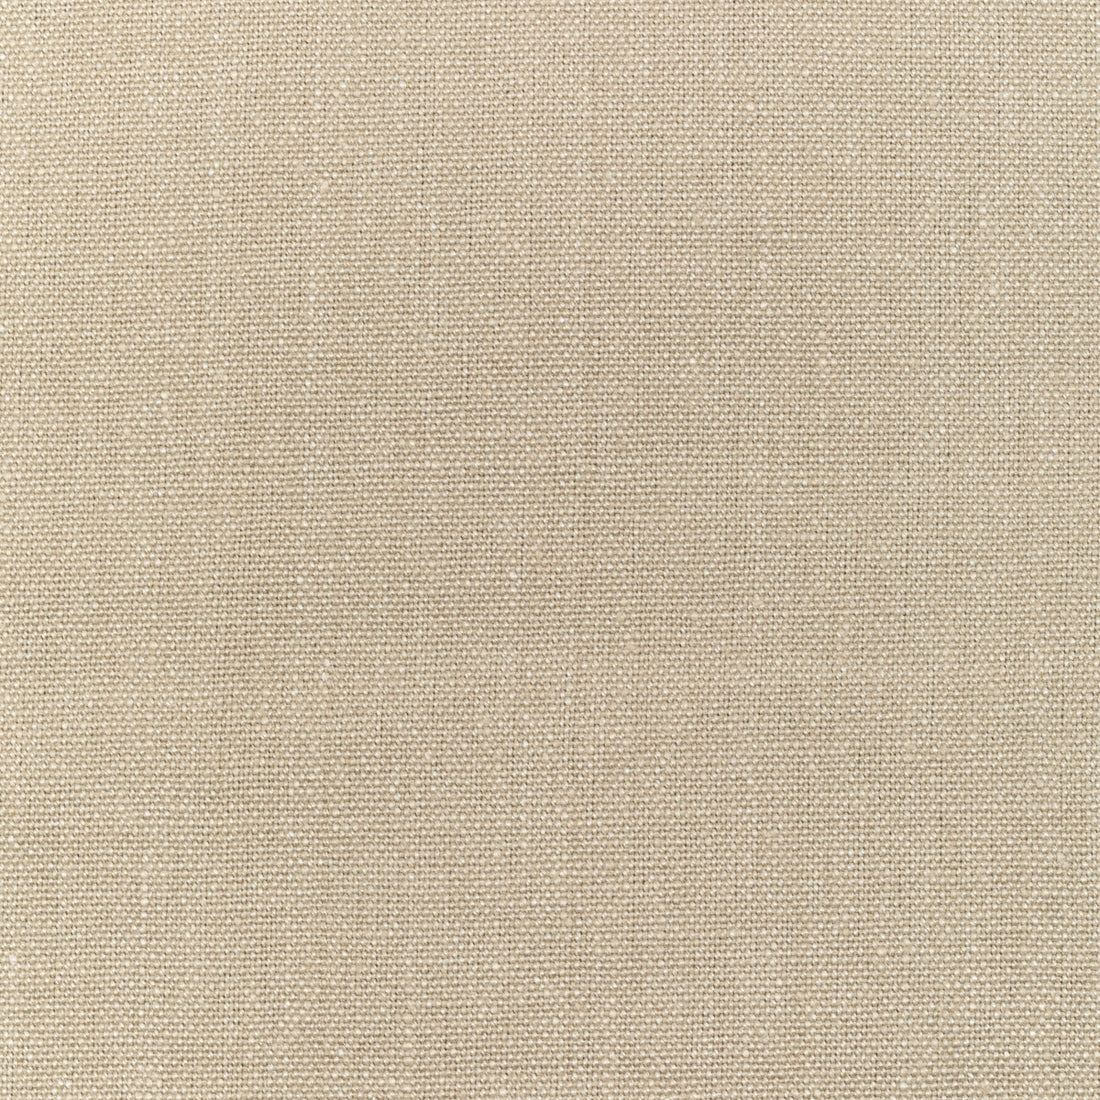 Watermill Linen fabric in pebble color - pattern 2012176.116.0 - by Lee Jofa in the Colour Complements II collection